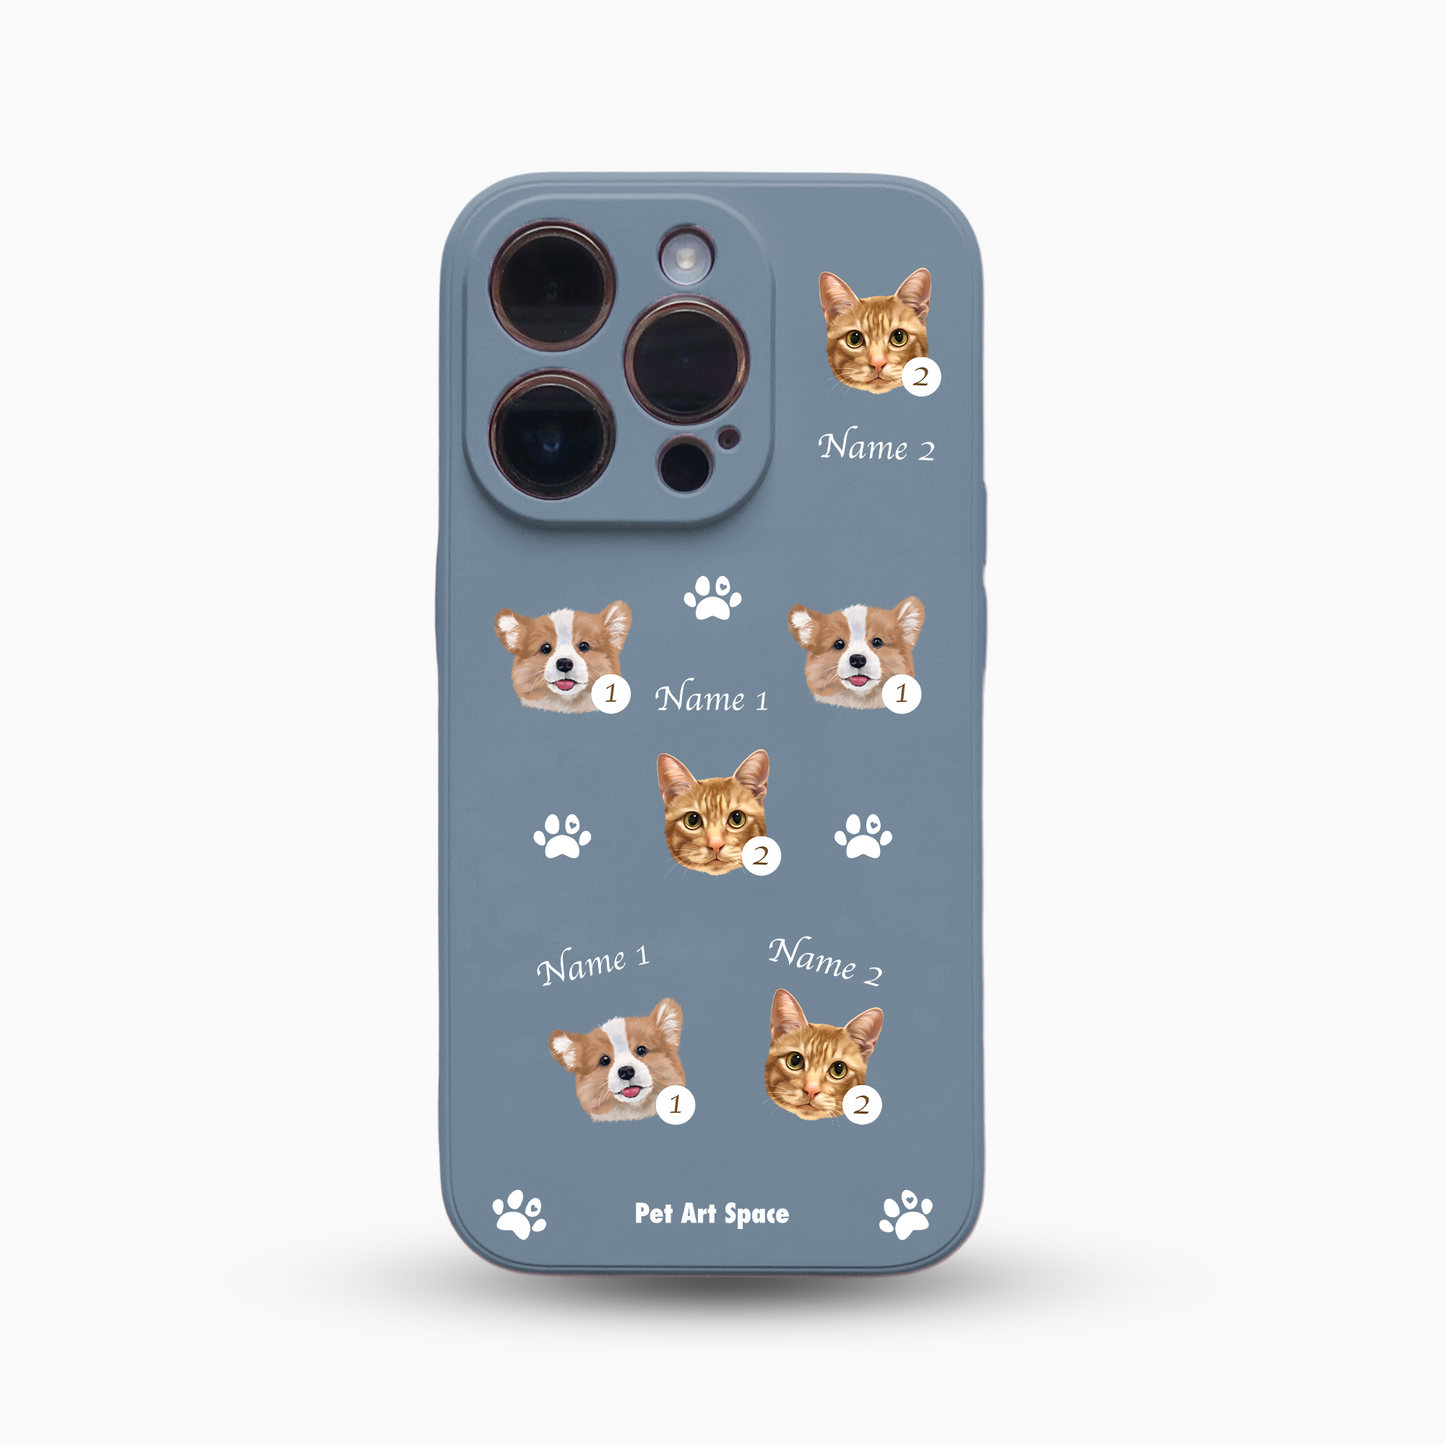 Paws A for 2 Pets - Silicone Case - Dusty Blue